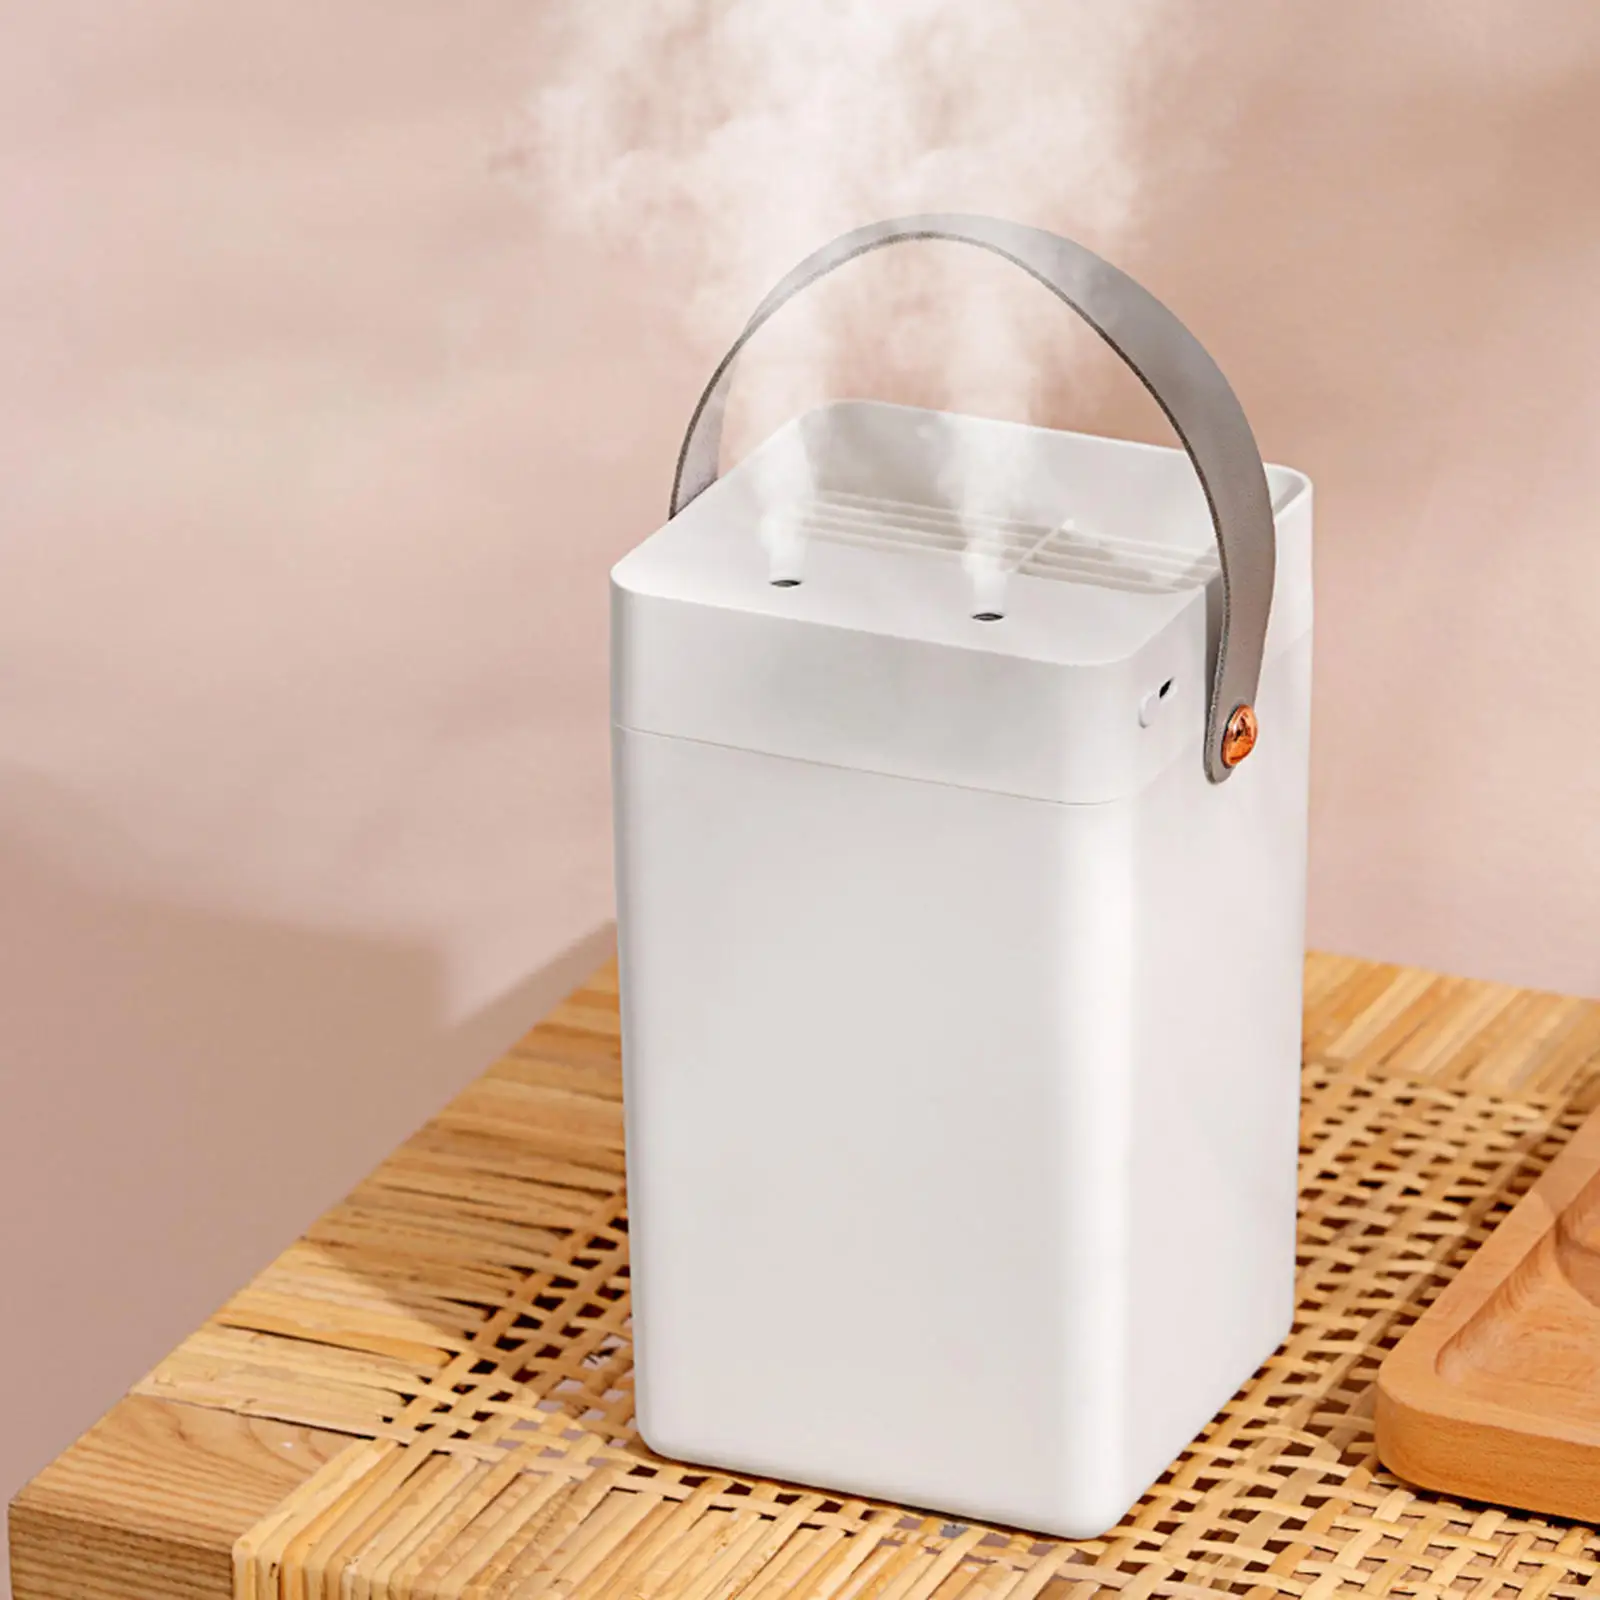 Quiet Double Nozzles Humidifier Large Capacity Nebulizing Essential Oil Diffuser Aromatherapy Cool Mist USB for Large Room Home